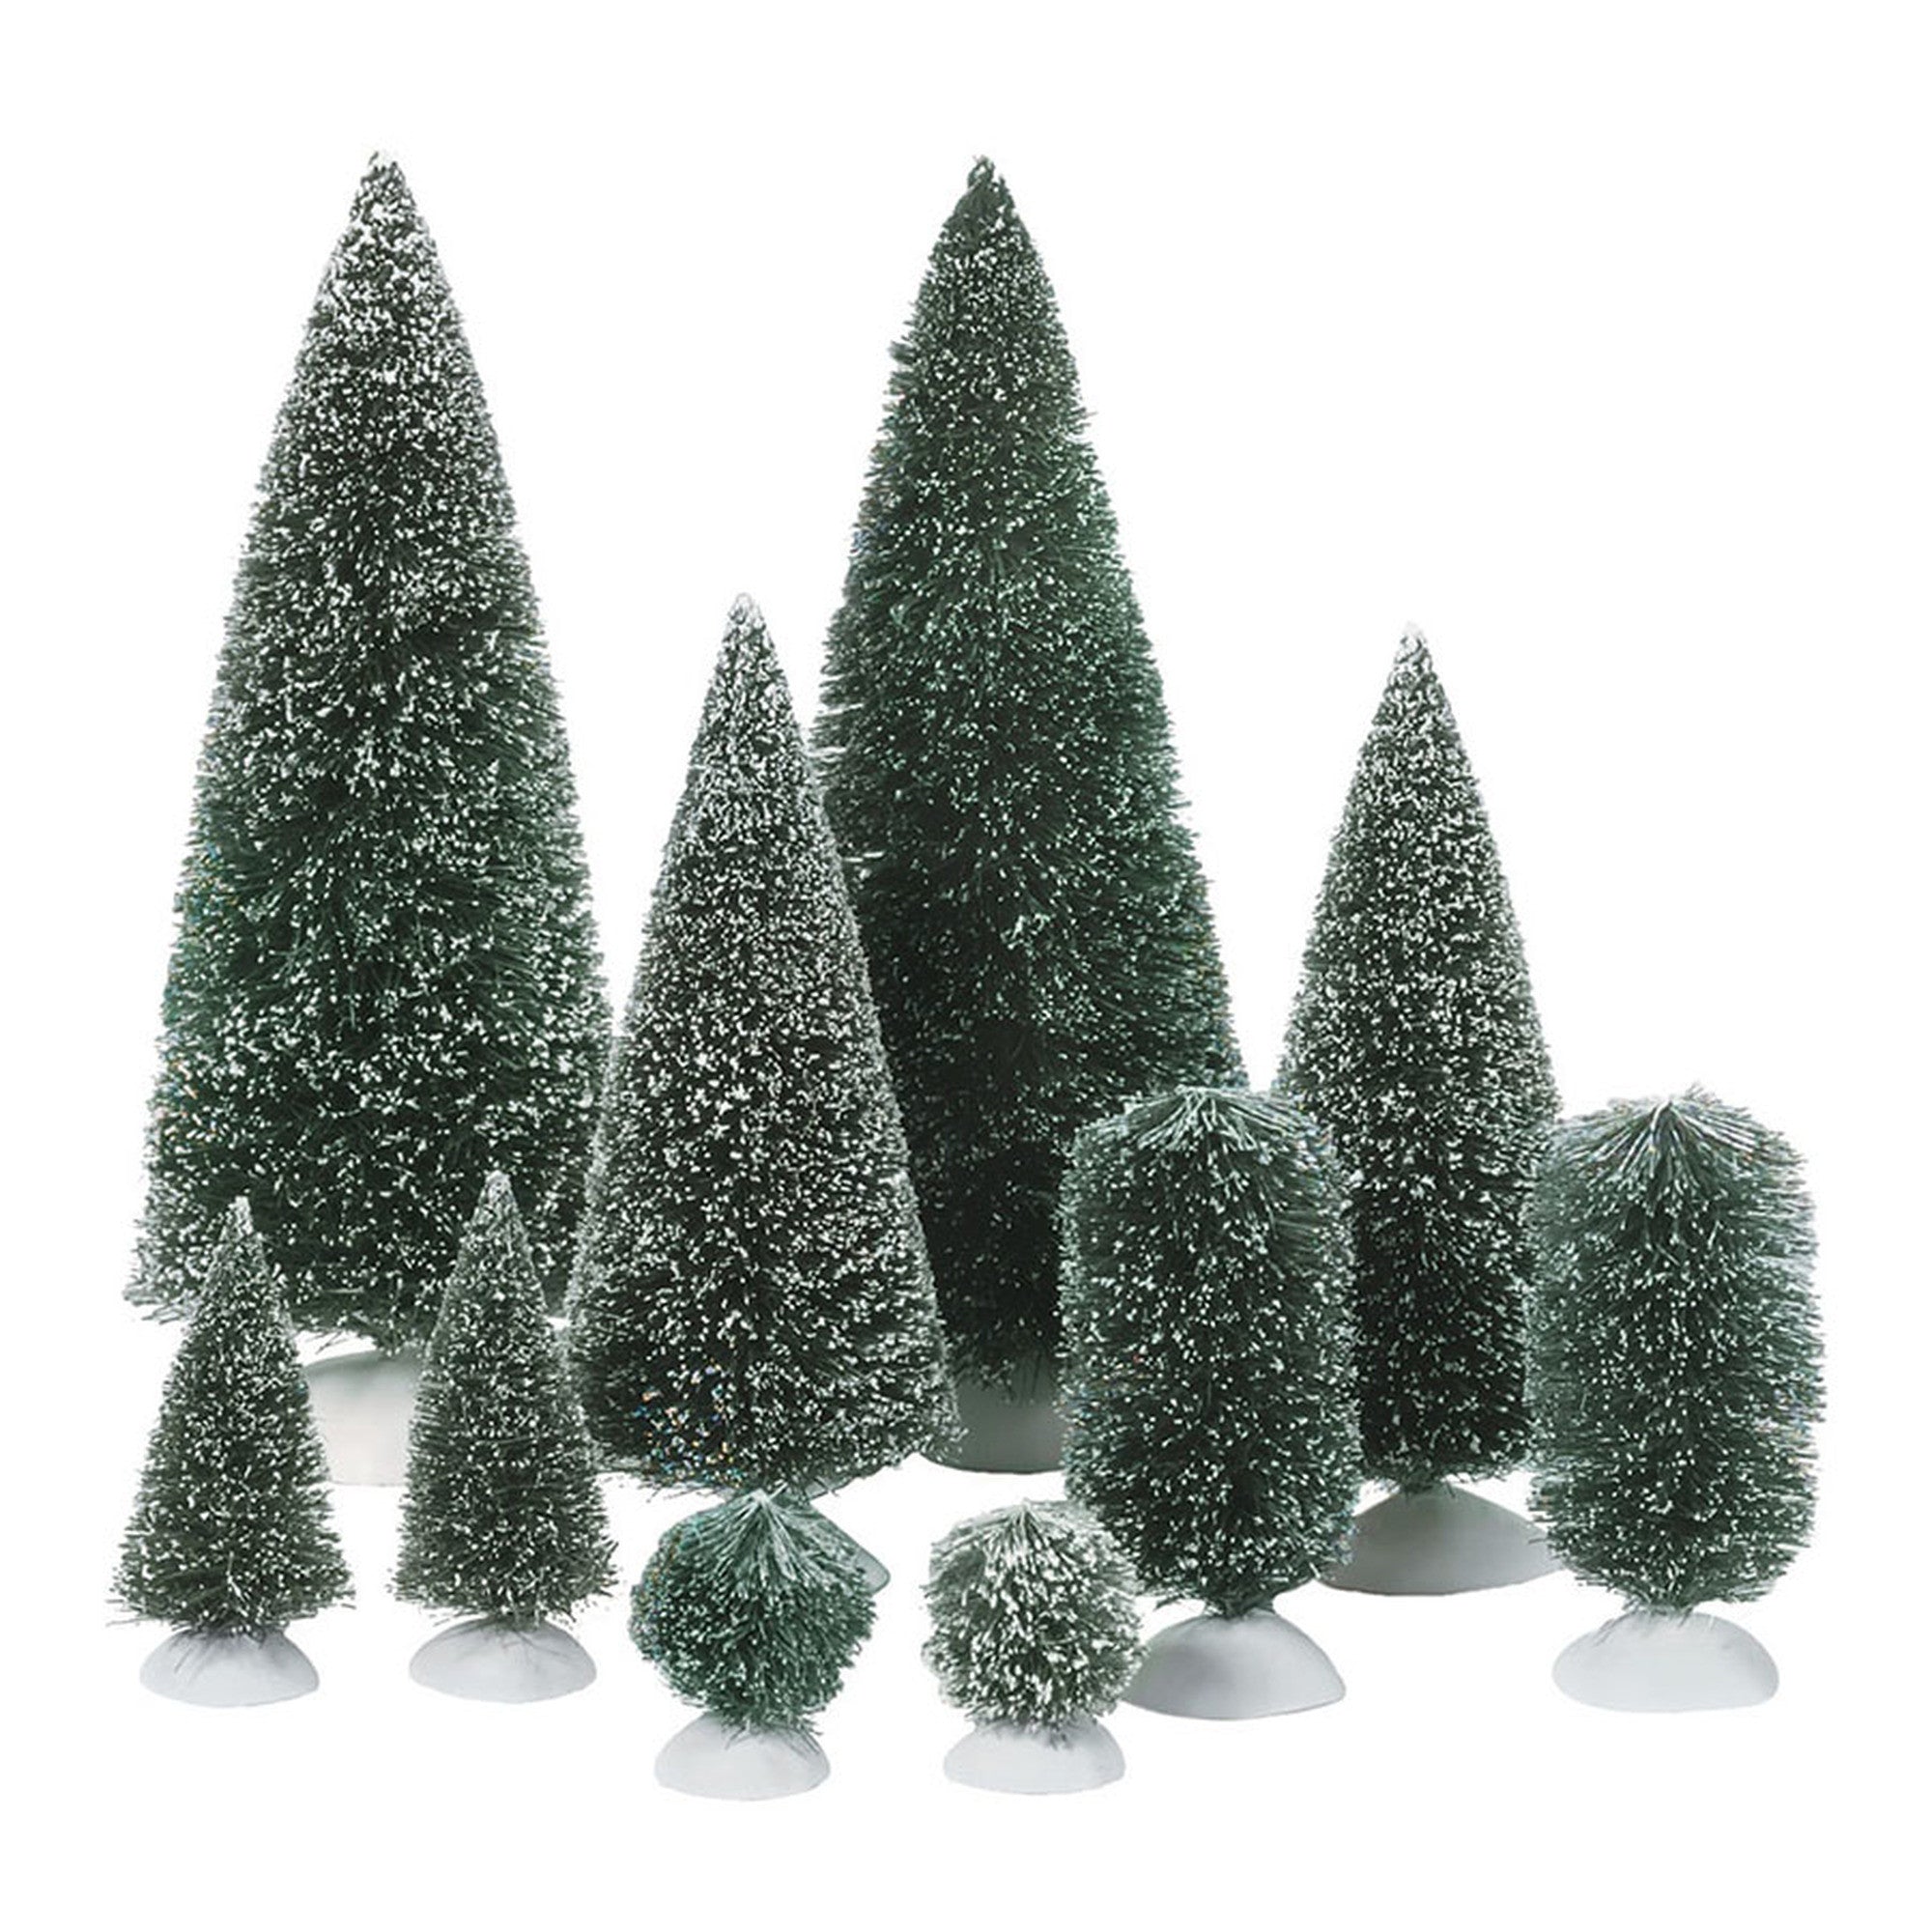 Village Accessory: Bag-O-Frosted Topiaries, Set Of 10